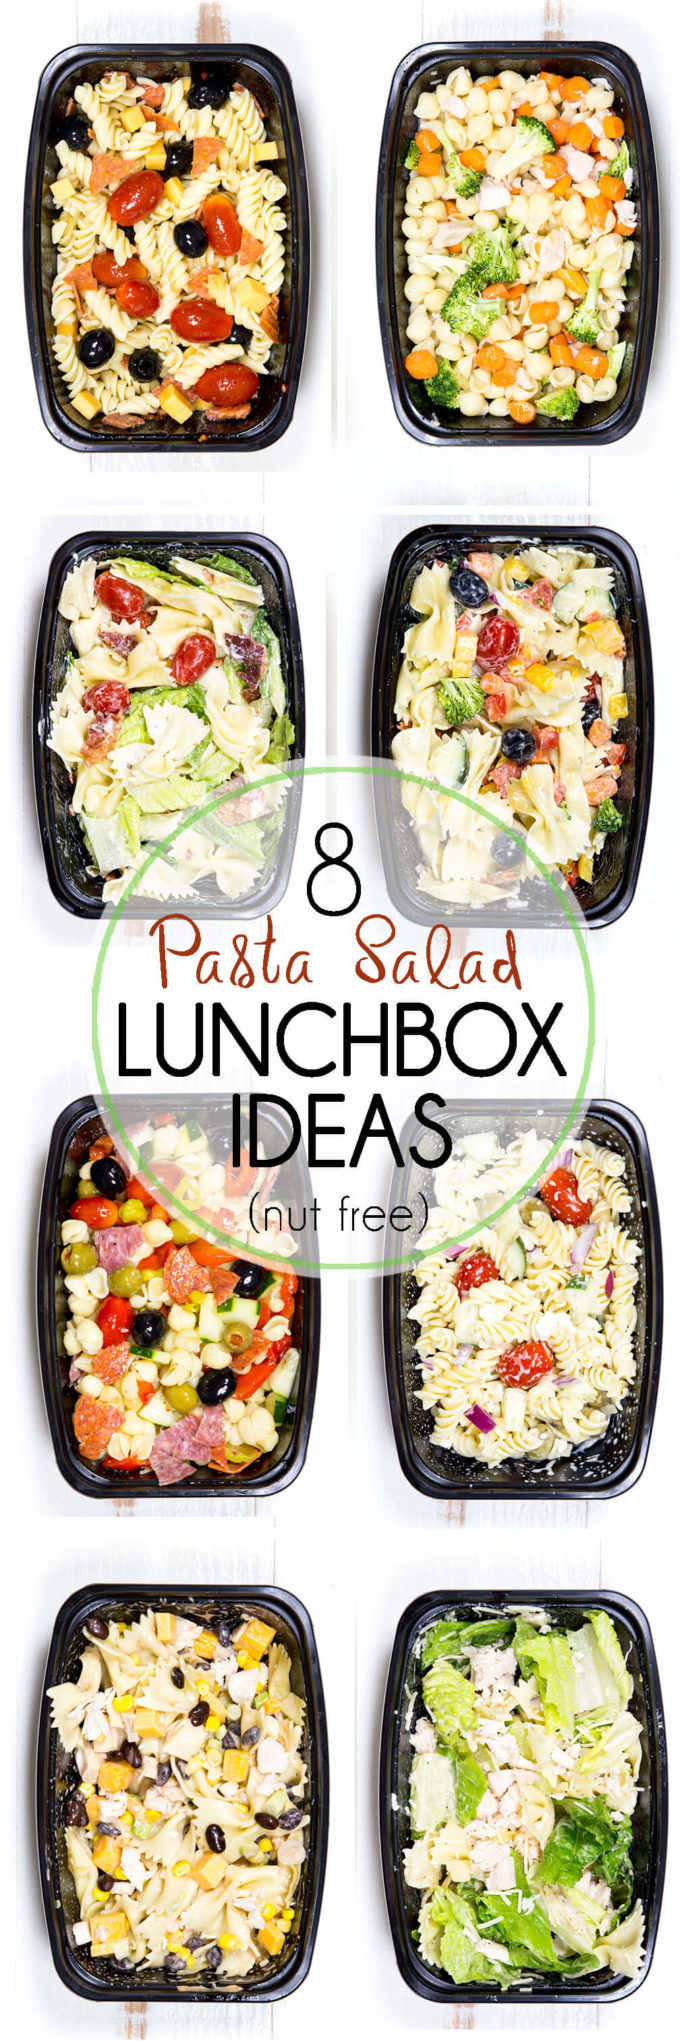 Lunchbox ideas for adults